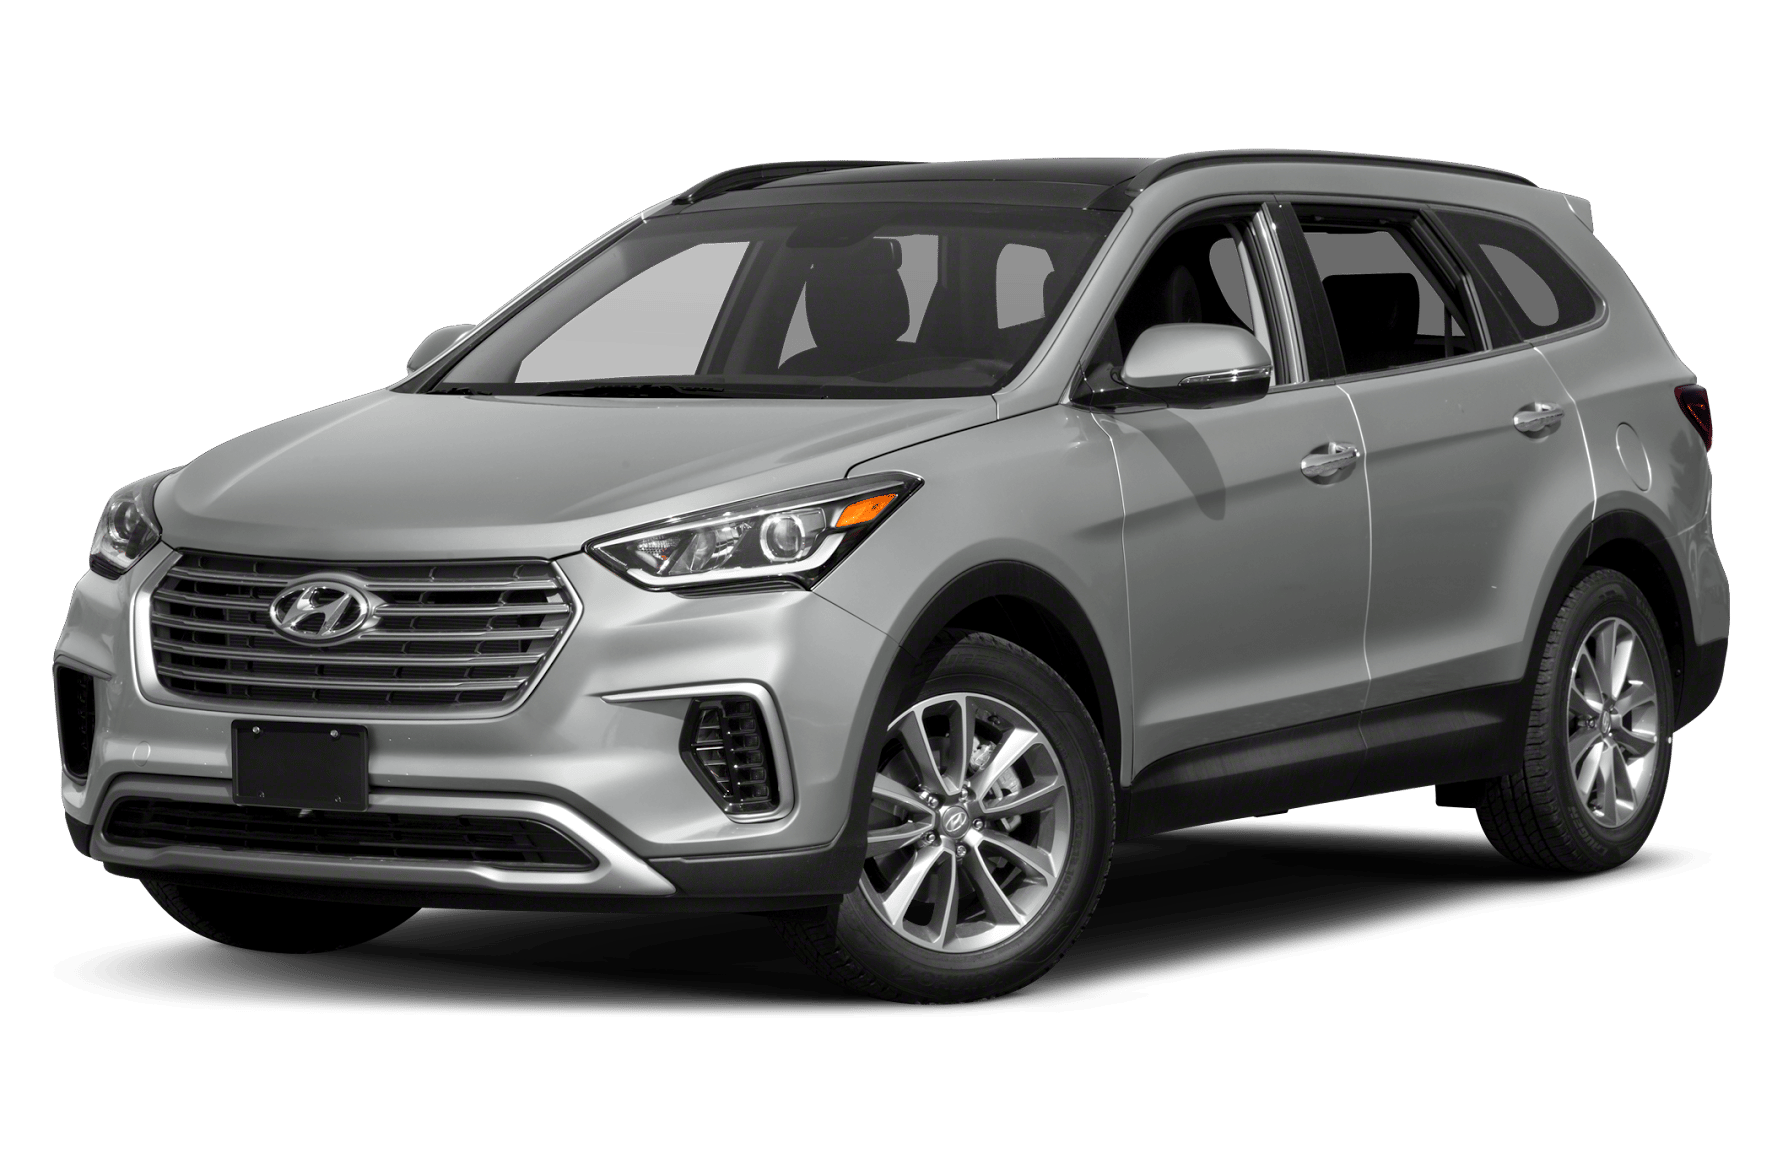 Hyundai is recalling 45,000 Santa Fe SUVs due to potential ABS-module caused fires